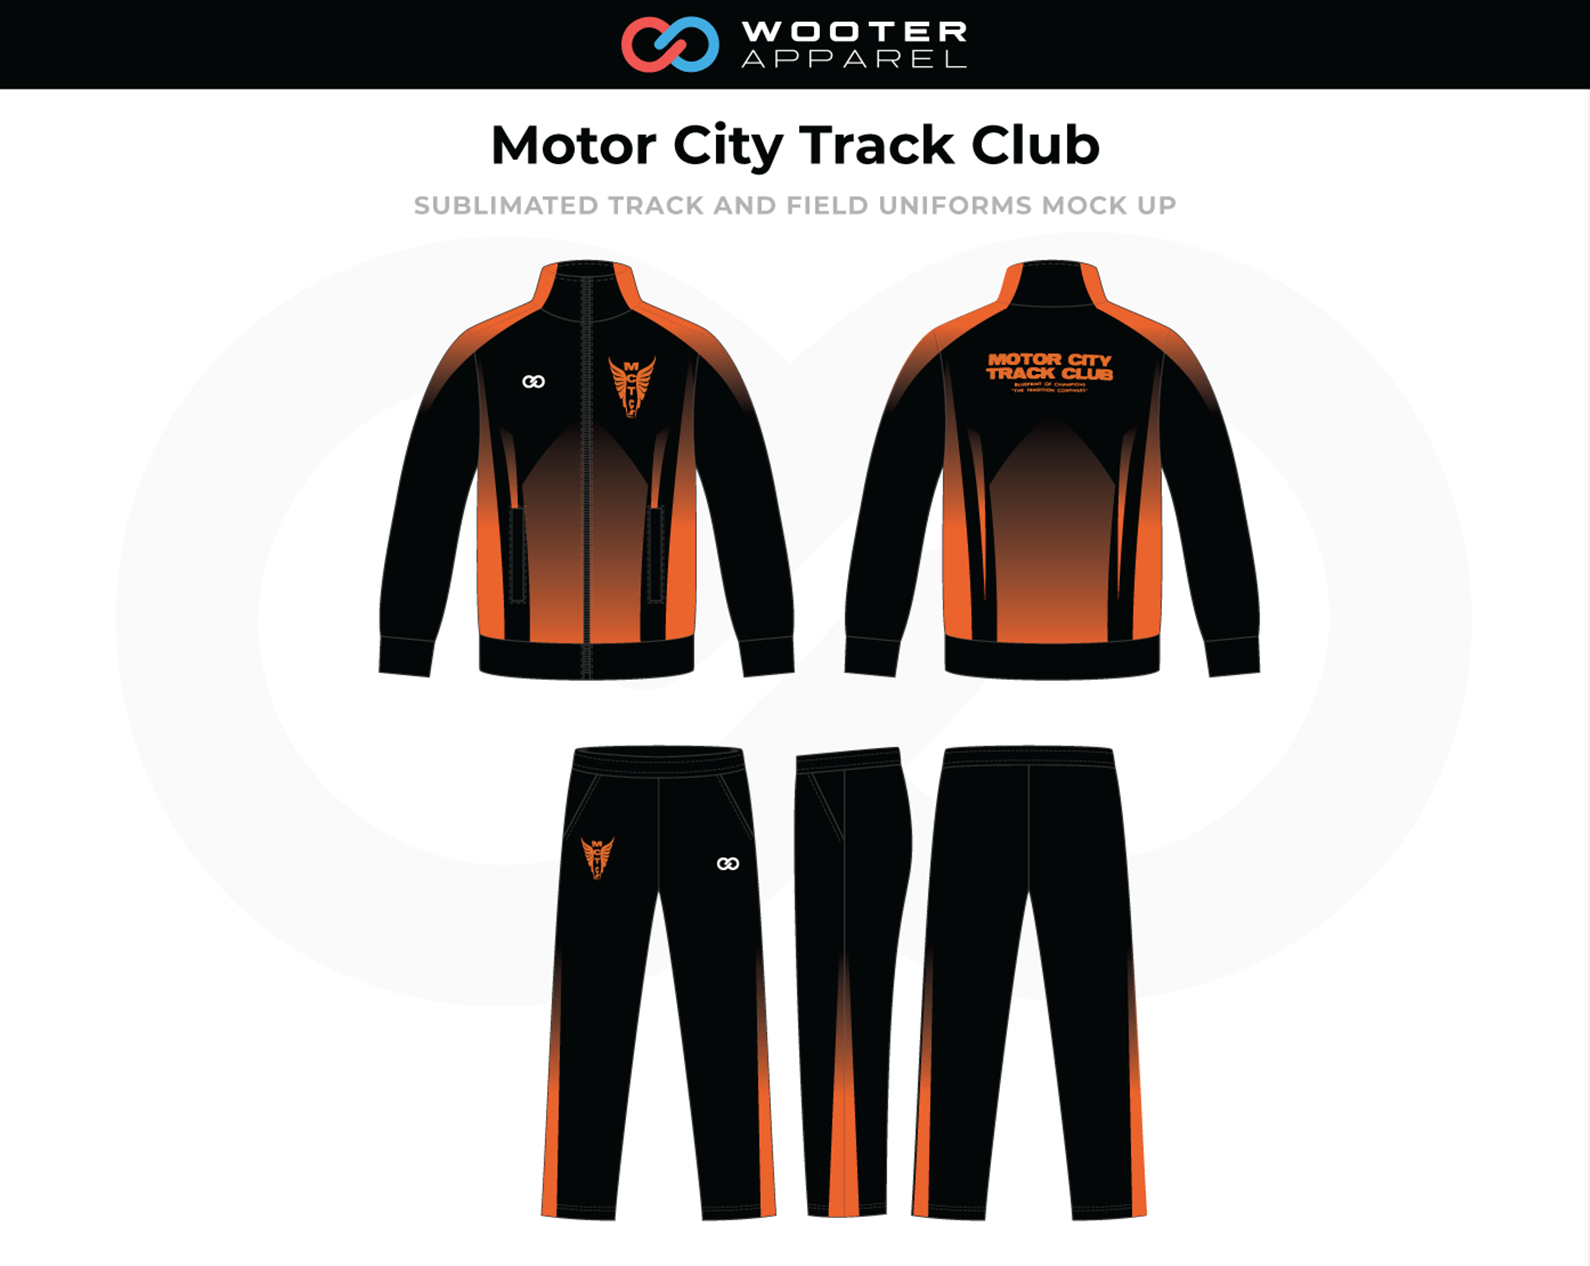 Motor-City-Track-Club-Sublimated-Track-and-Field-Warm-ups_v1_2018.png